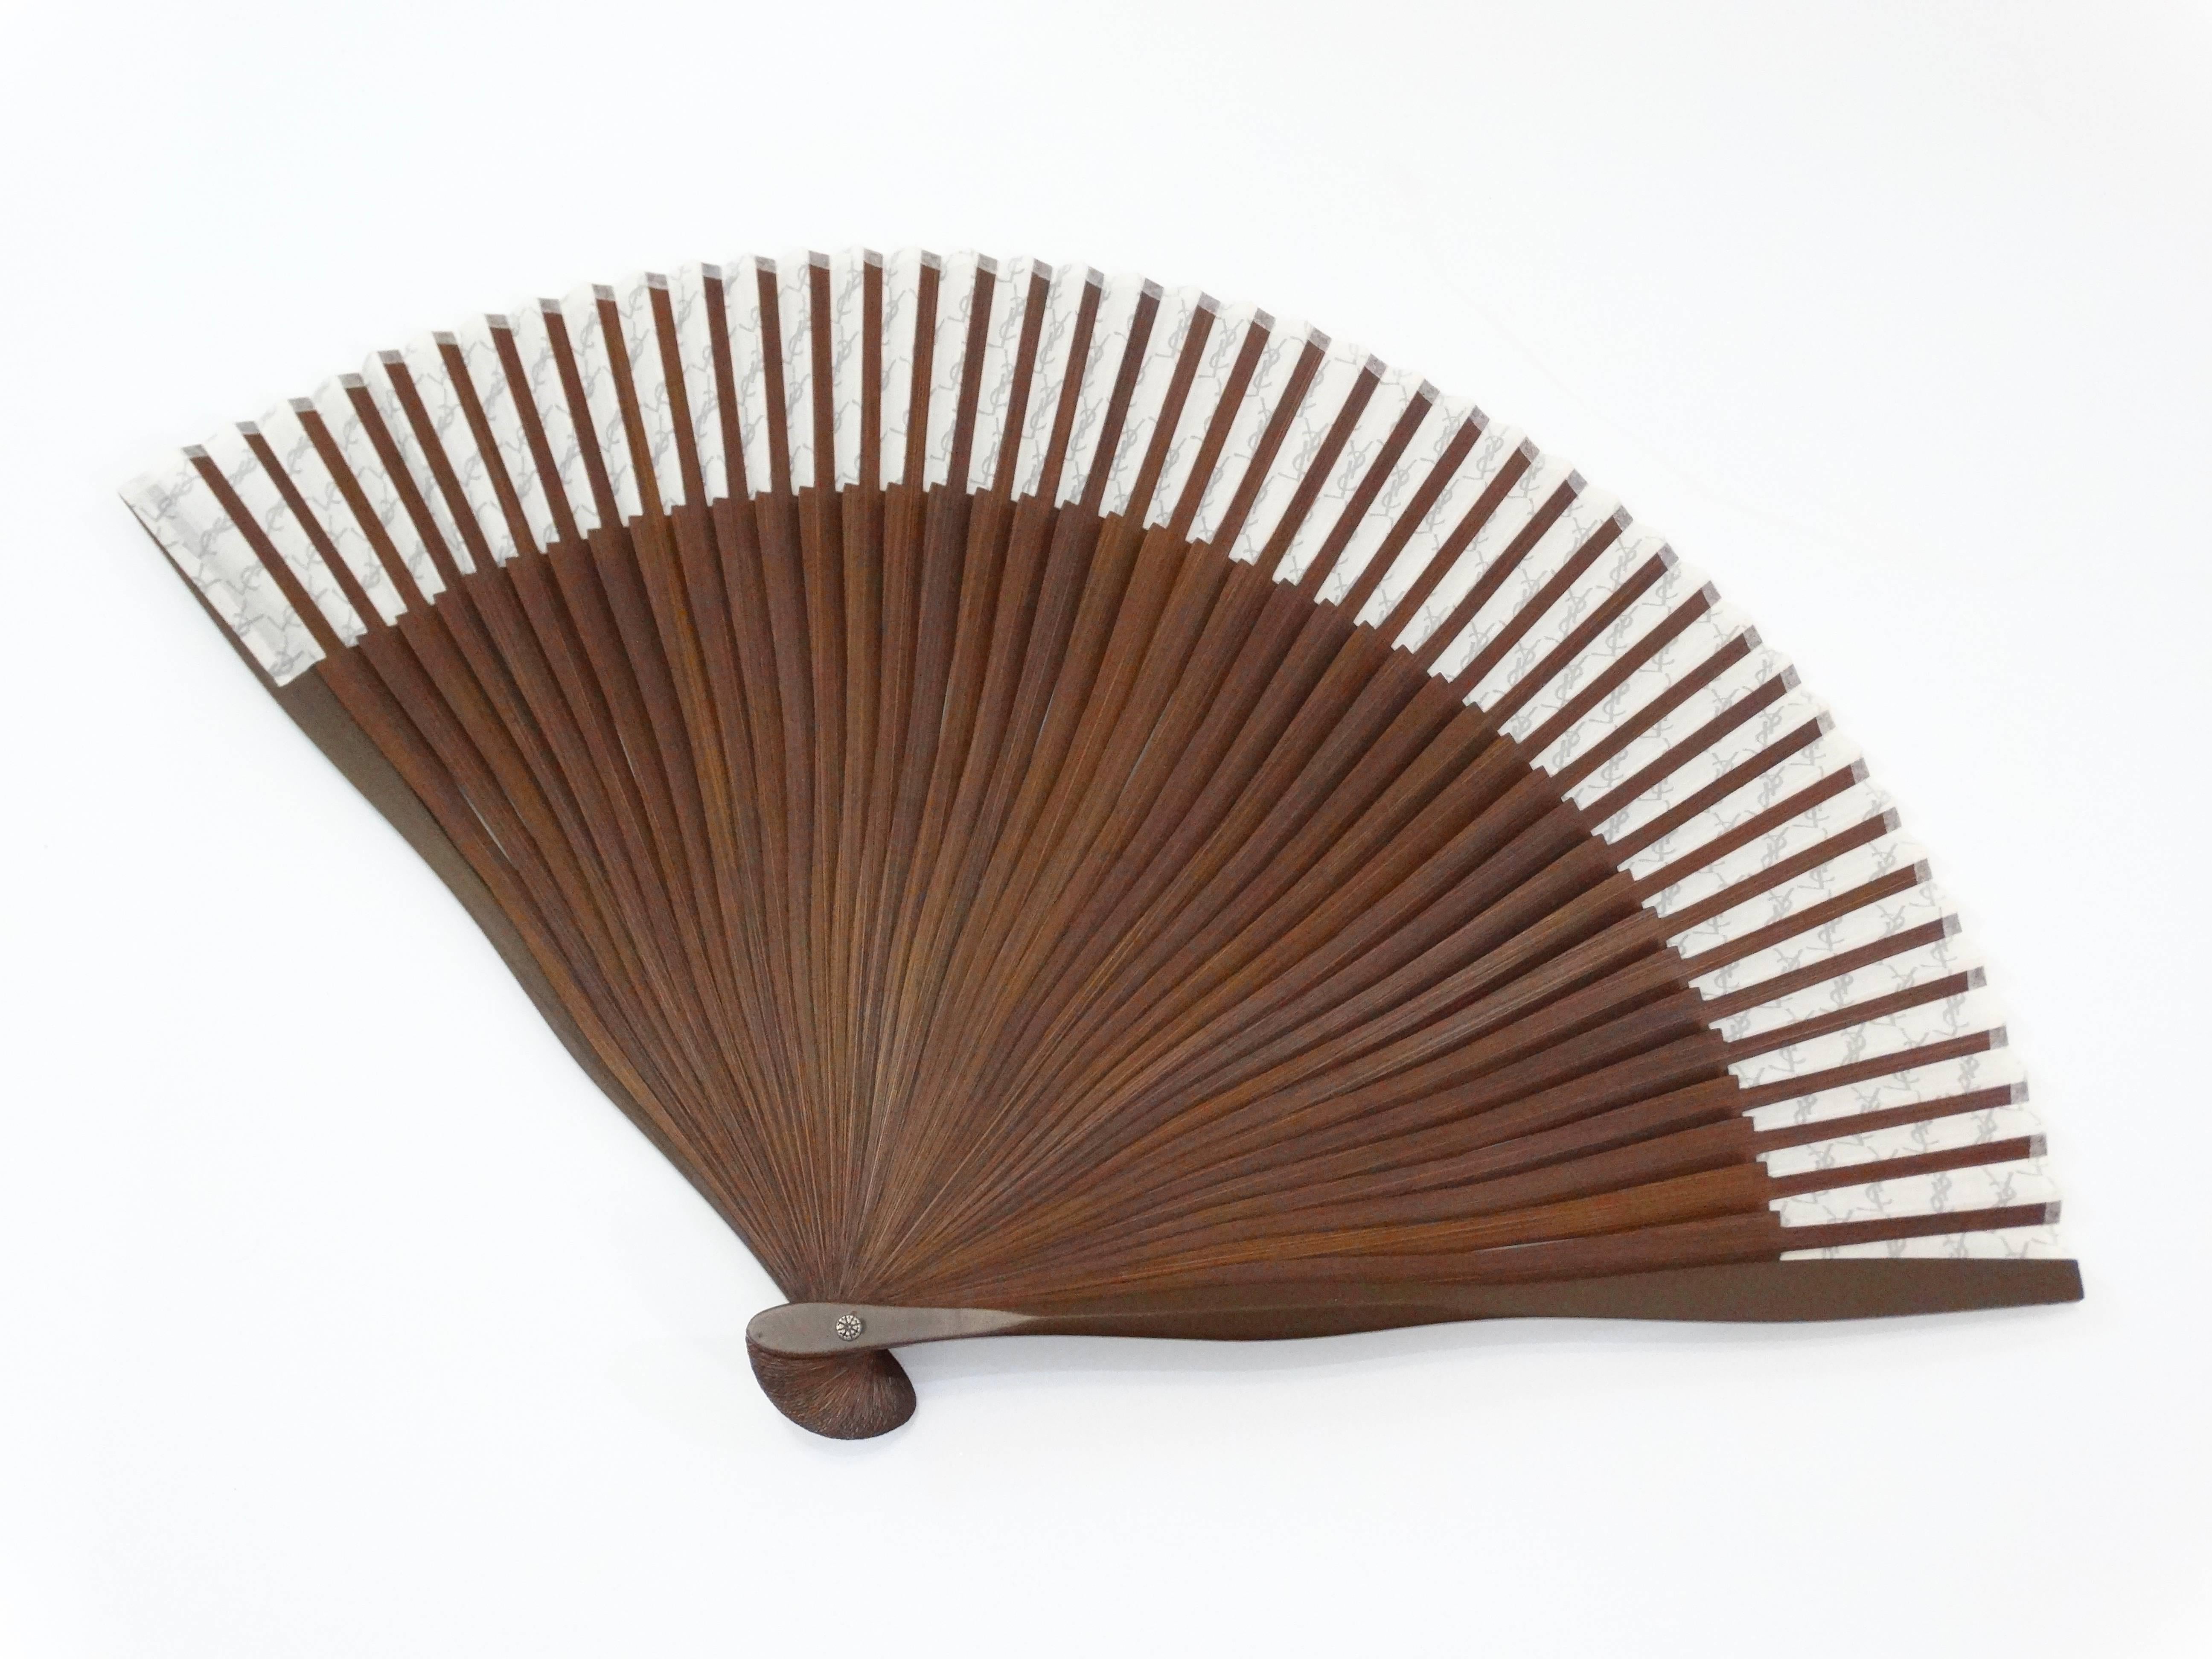 Cool off in style with our daintiest 1960s hand fan from Yves Saint Laurent! Rich brown wood handle fans out to reveal the paper YSL print in white and grey. Signed at the base of the fan with YSL signature. Comes with original ties and sheath. 